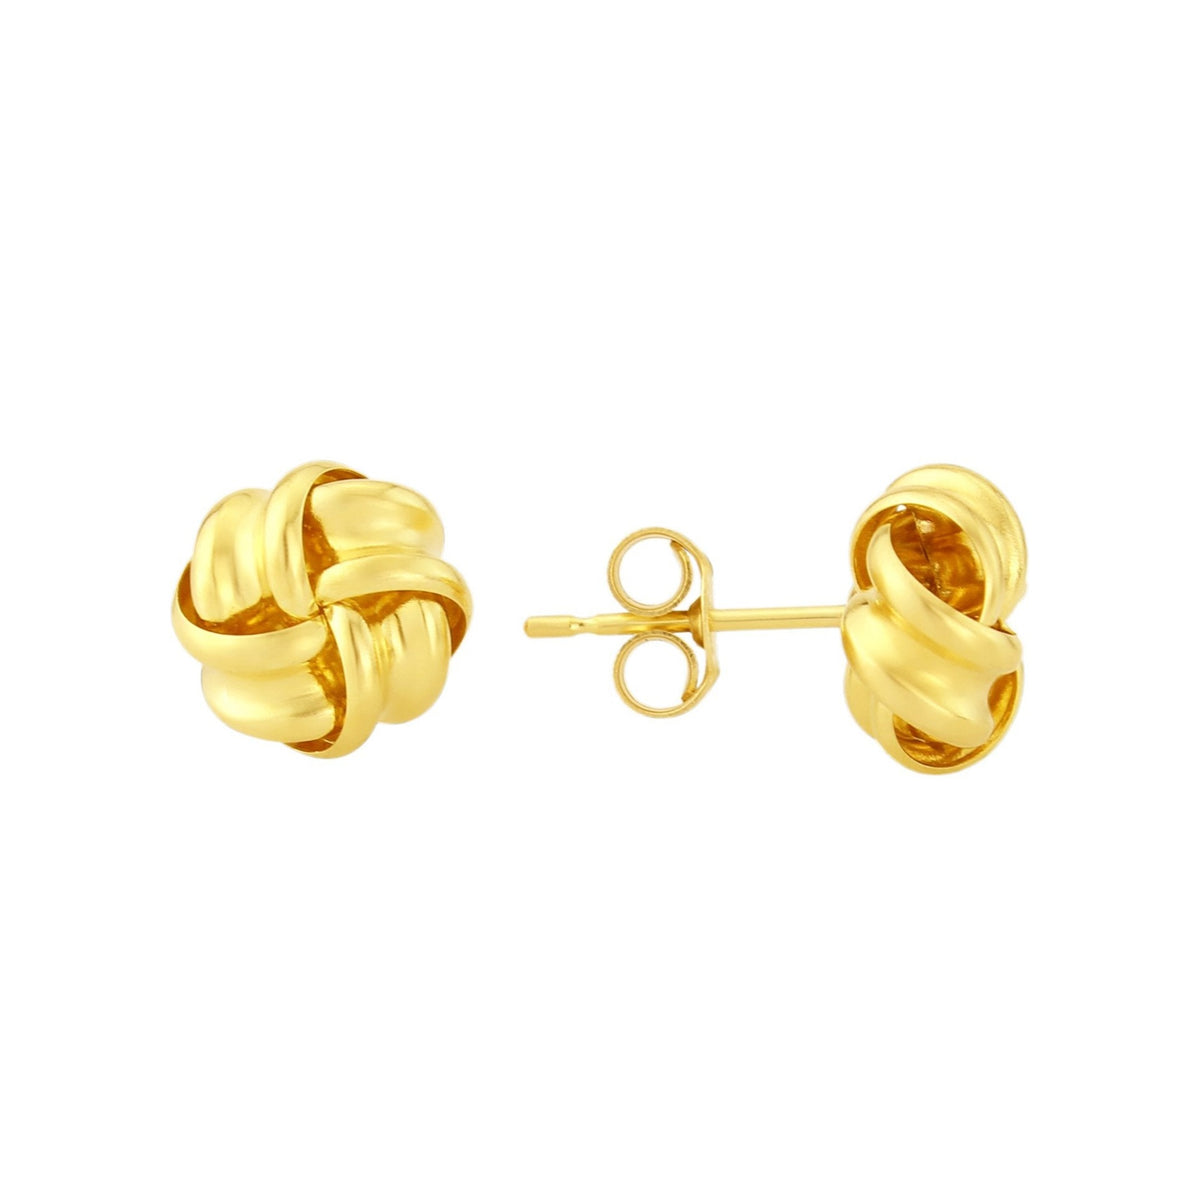 9ct gold knot studs